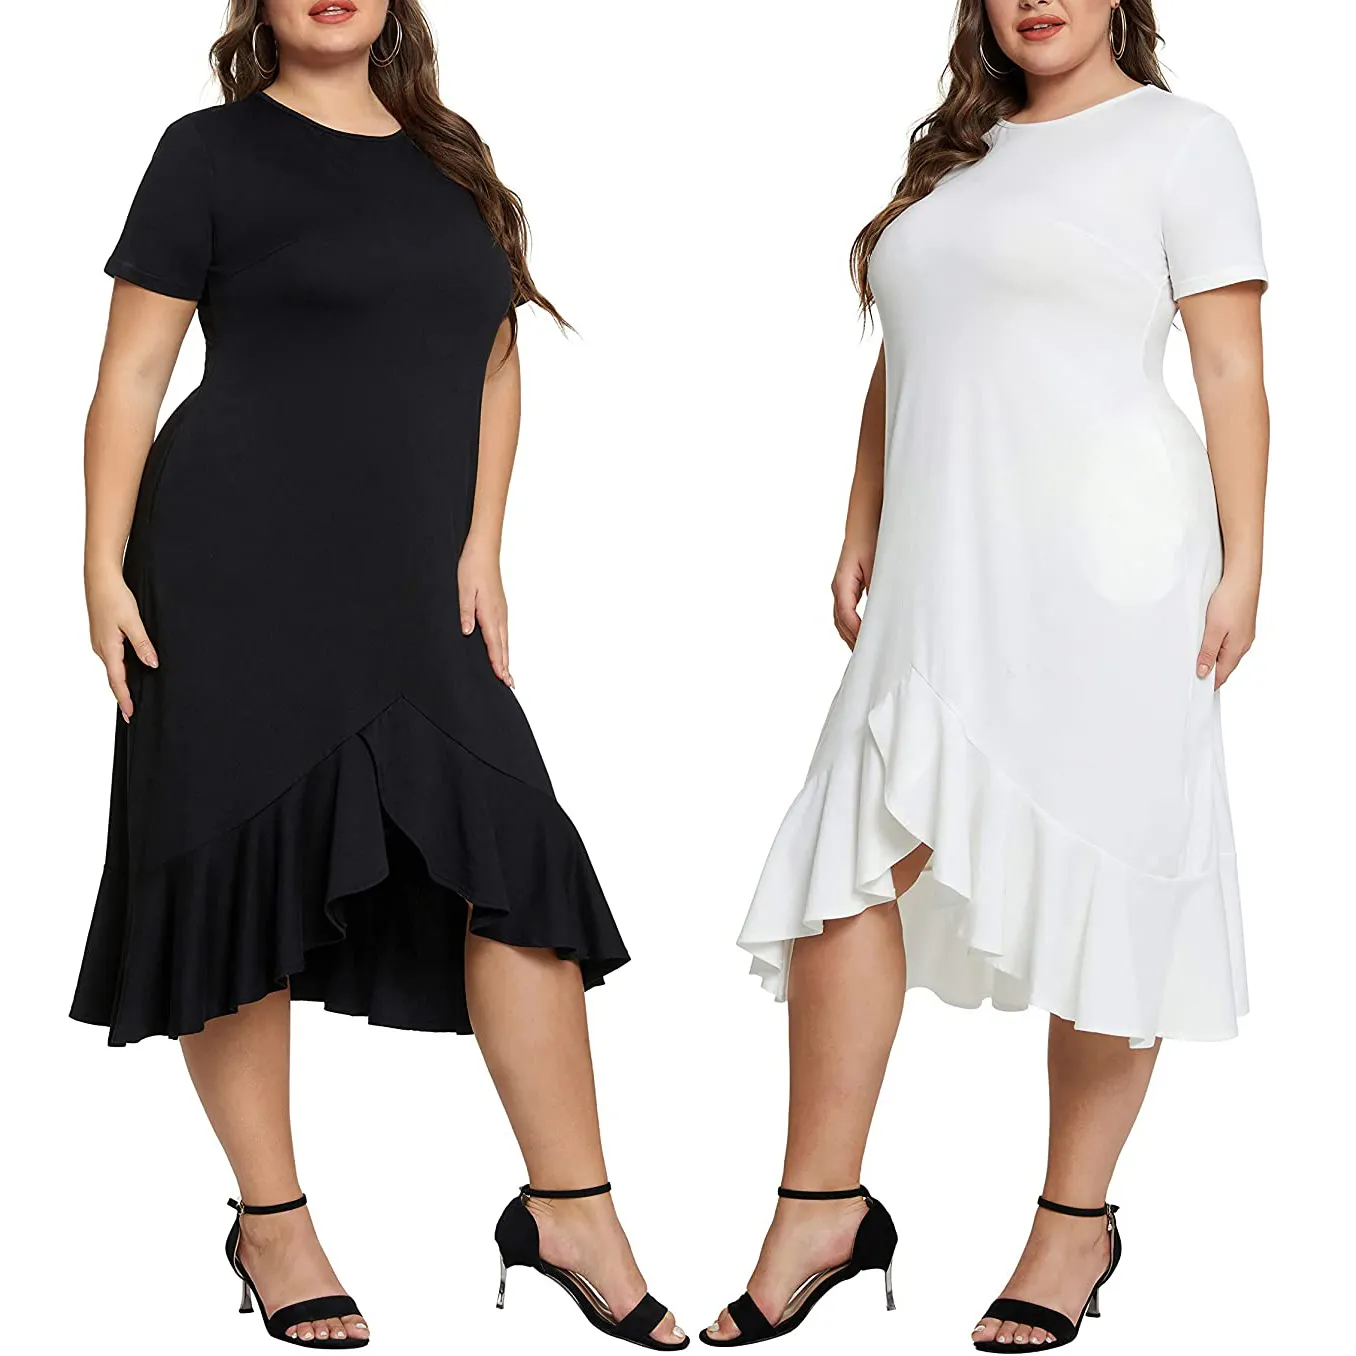 Plus Size Women Clothing Classic T Shirt Summer Short Sleeve White Office Wear Work Elegant Casual Midi Party Dress For Fat Lady